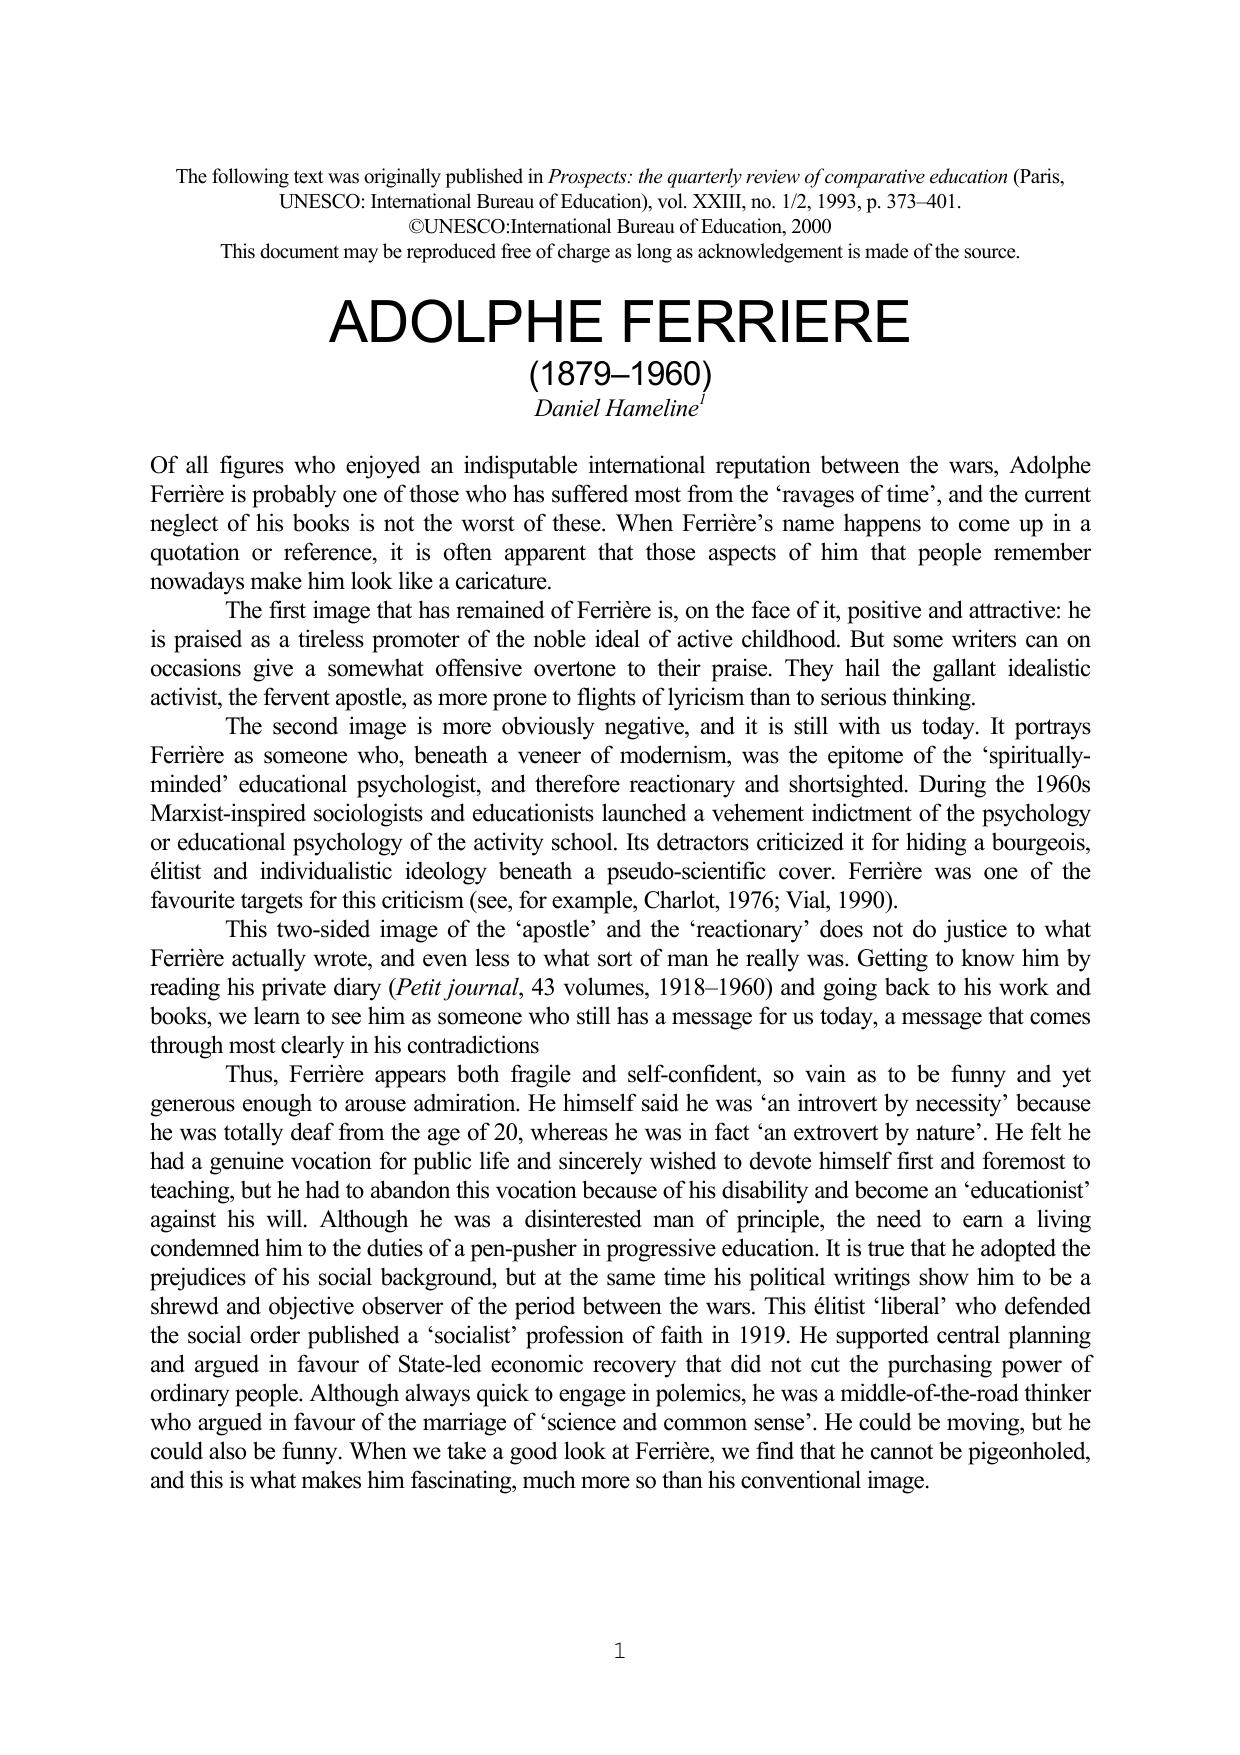 Adolphe Ferriere